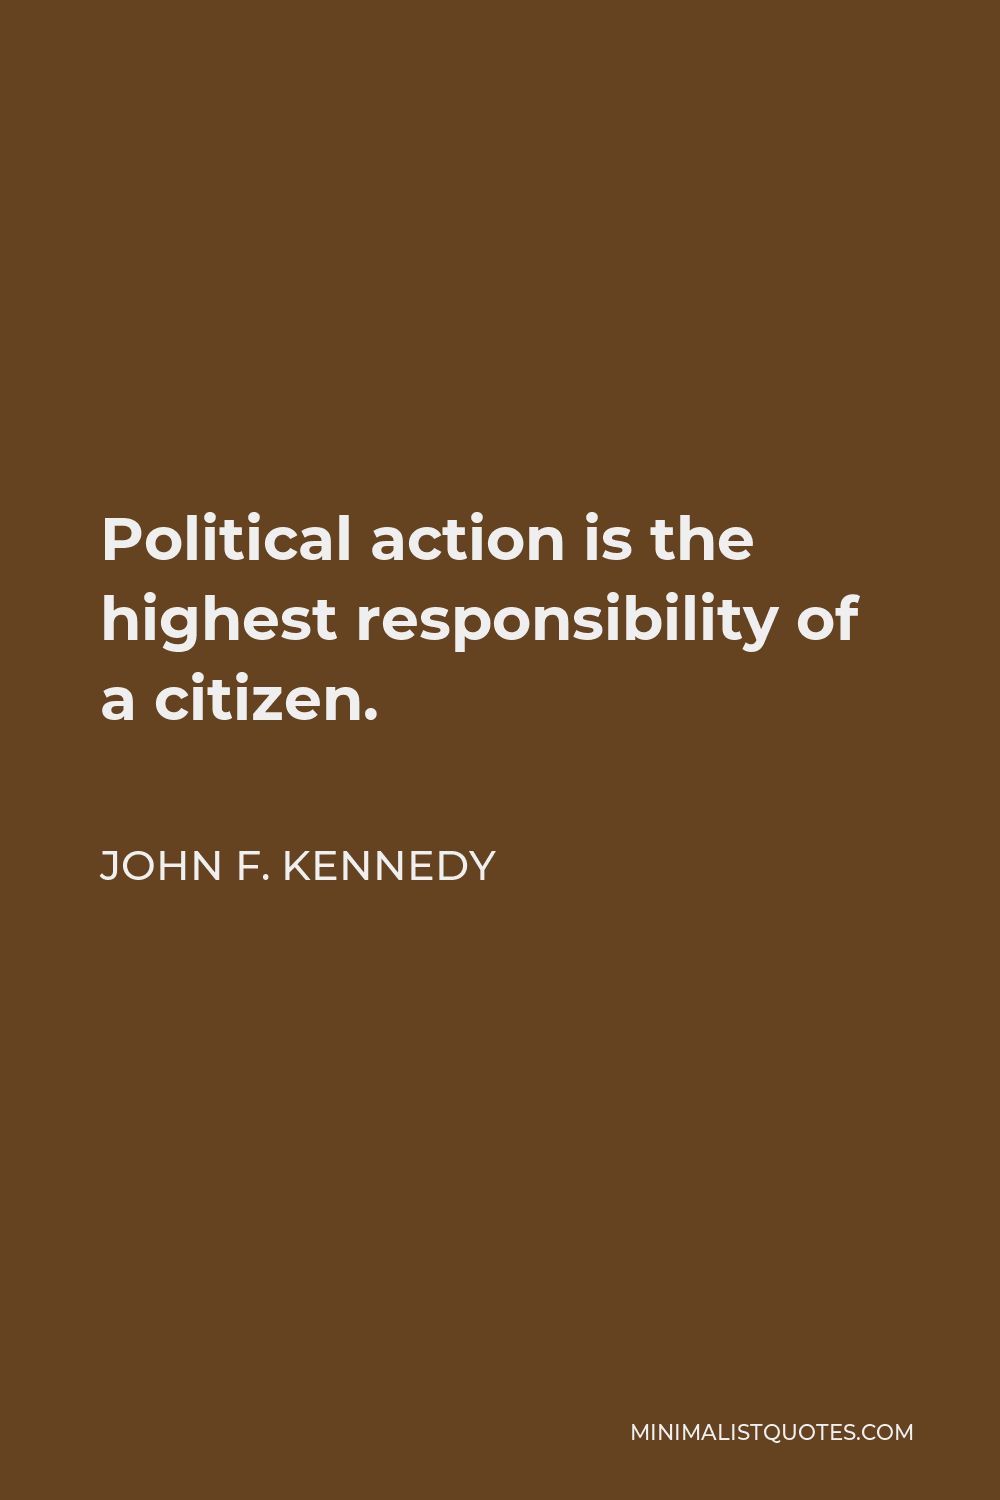 John F. Kennedy Quote - Political action is the highest responsibility of a citizen.